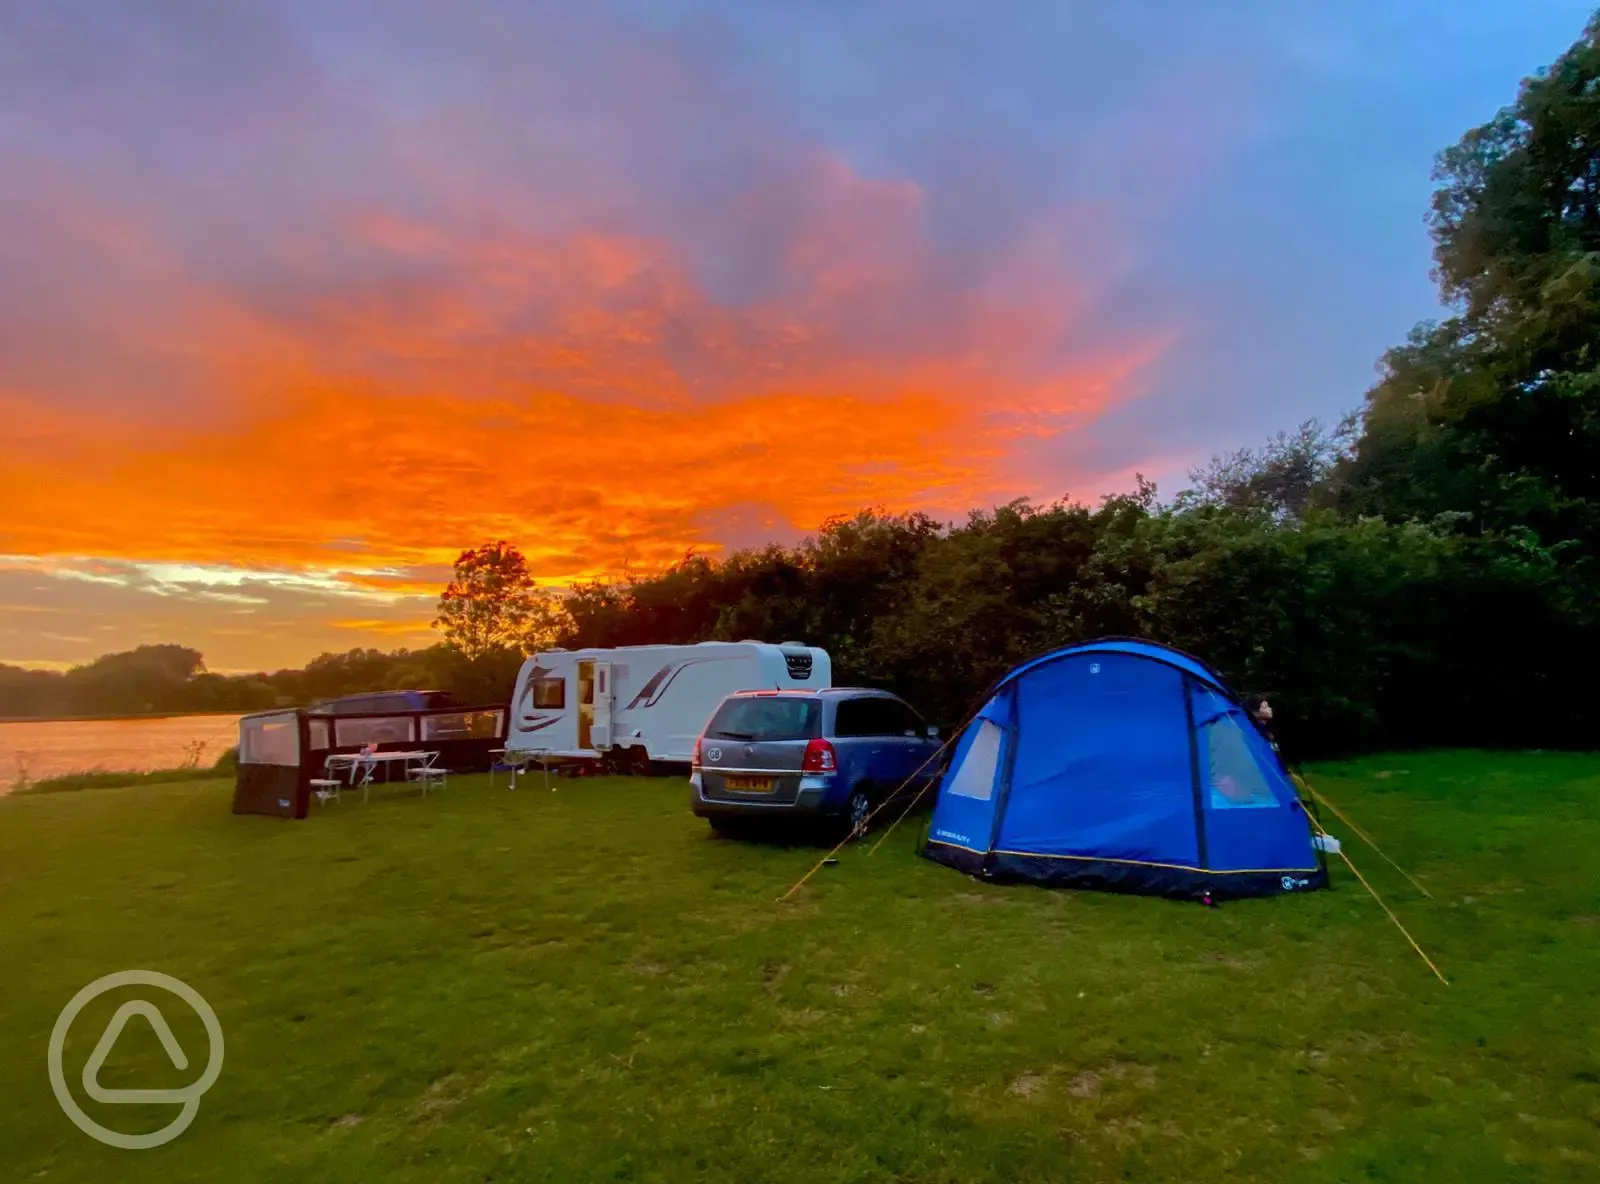 Sunset on The Glade Campsite